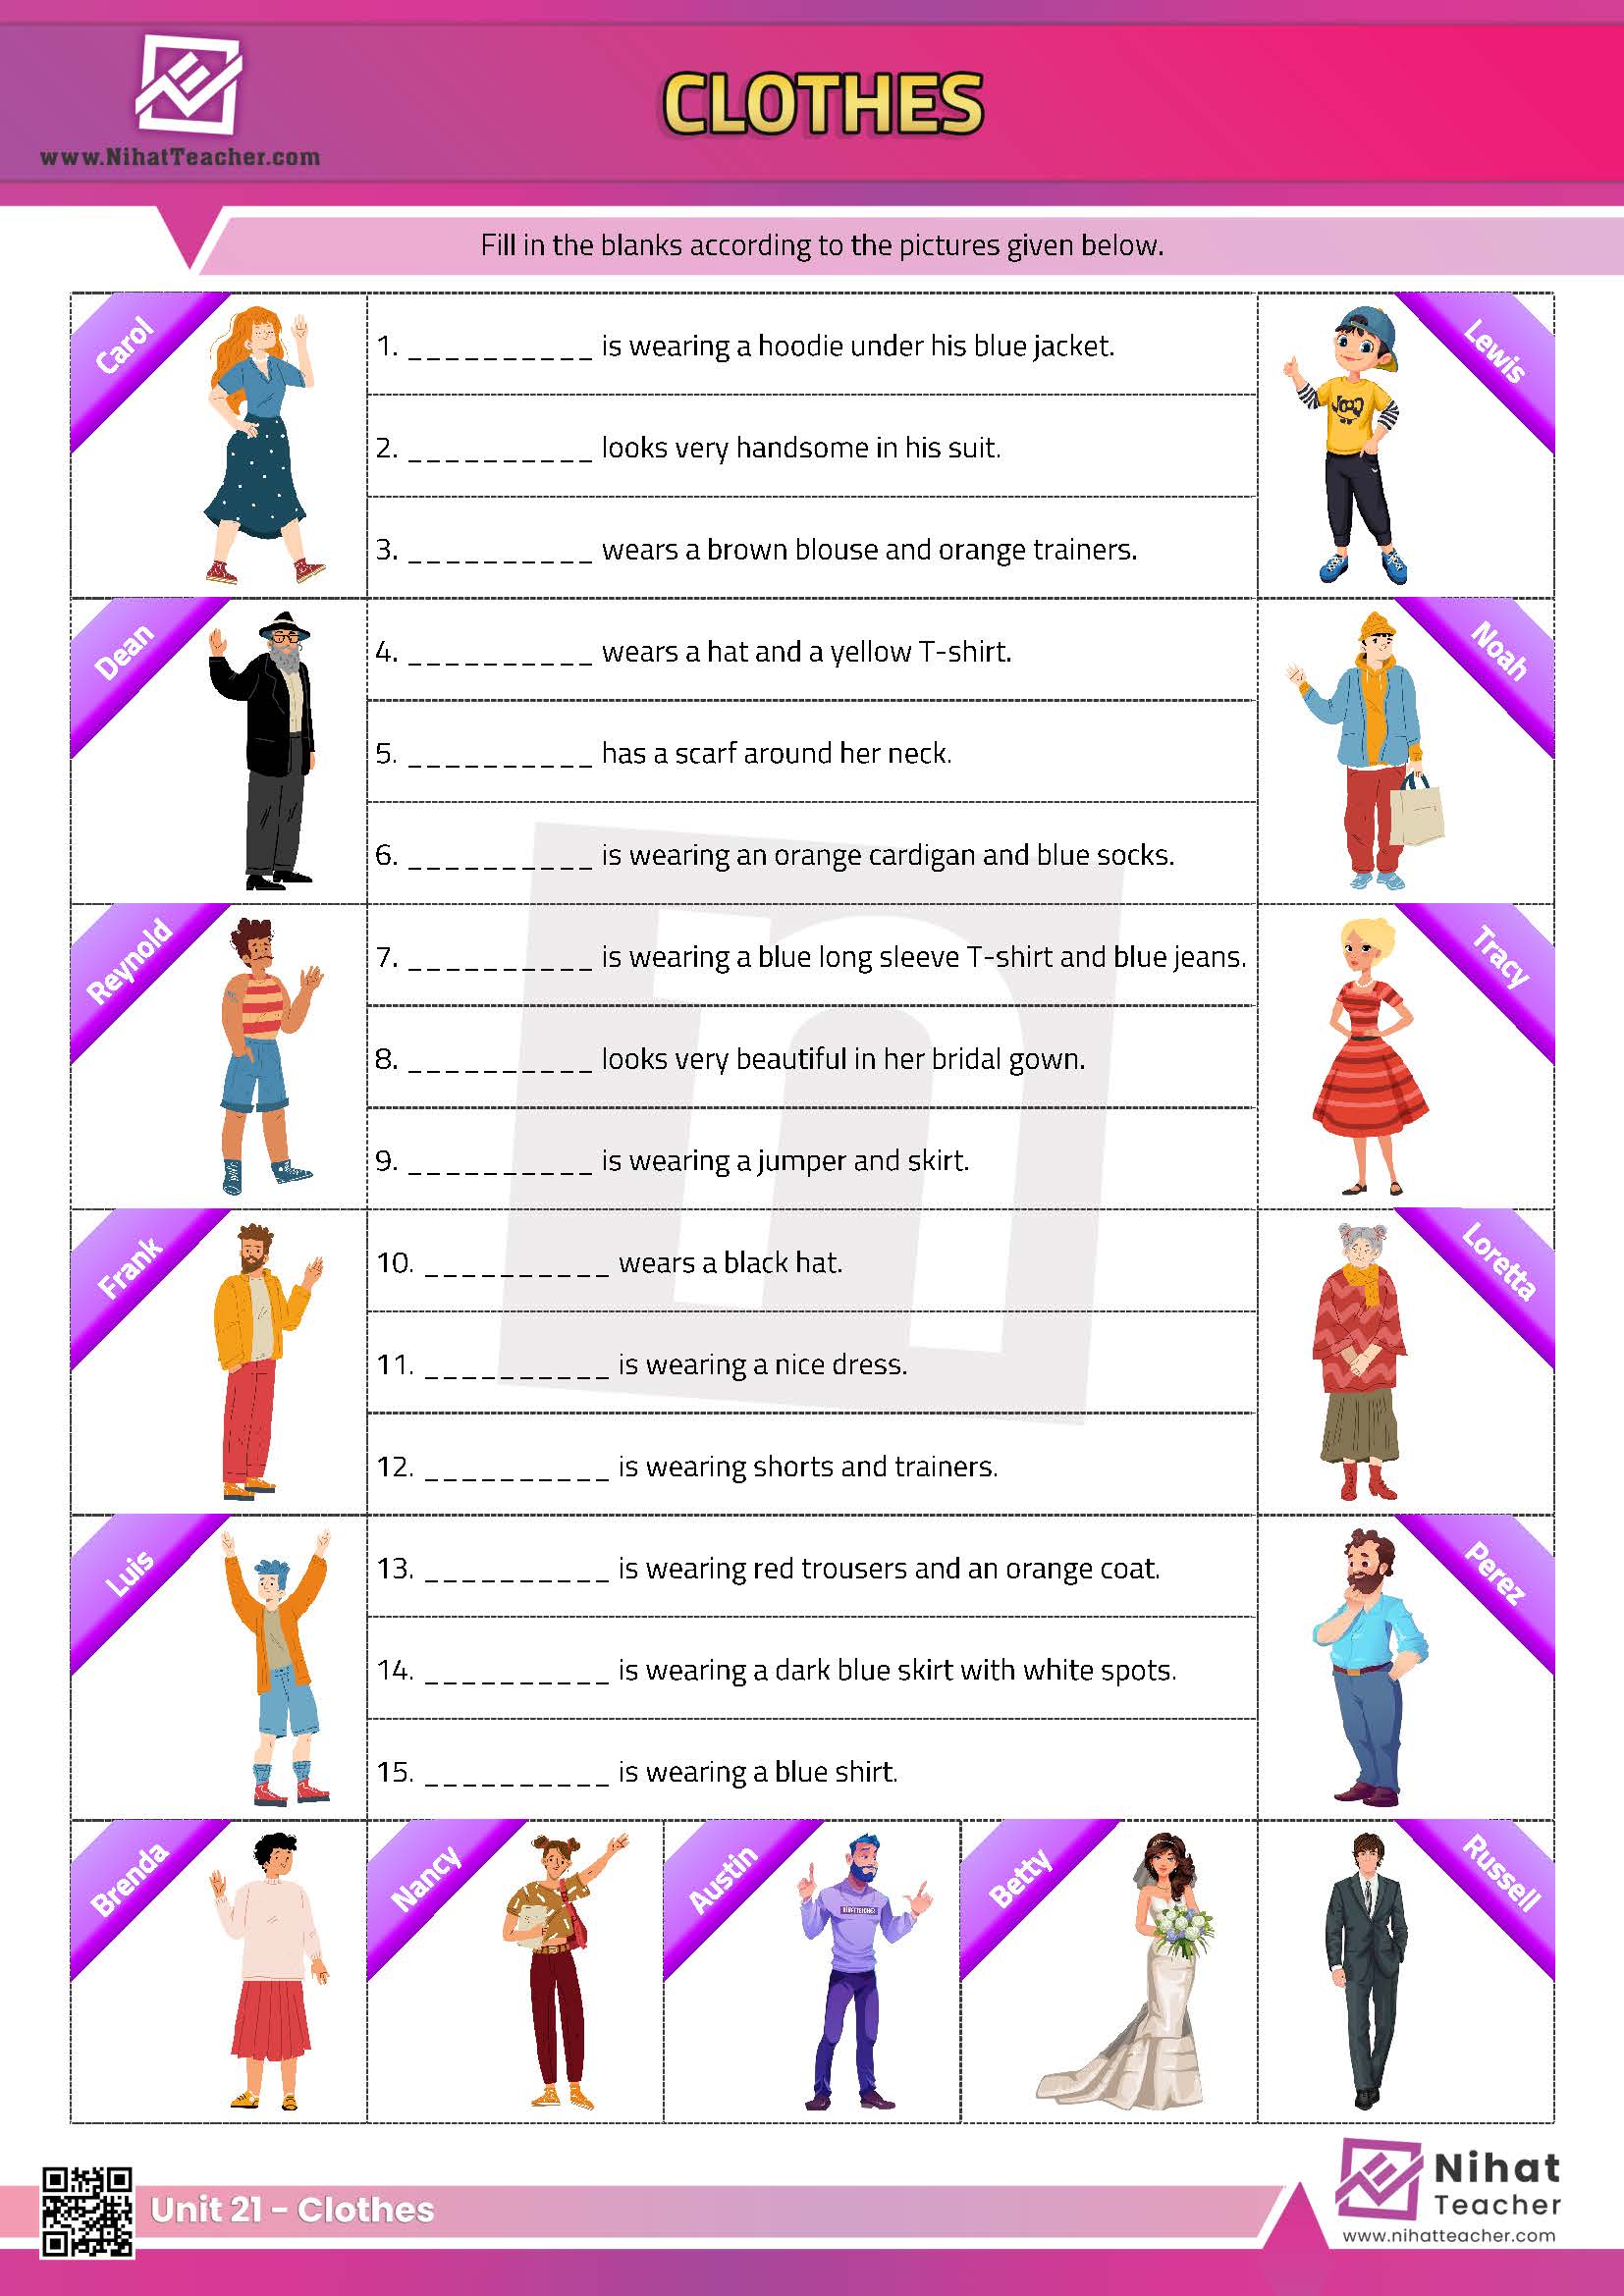 Unit 21 - Clothes Worksheet 3 - Free English learning and teaching